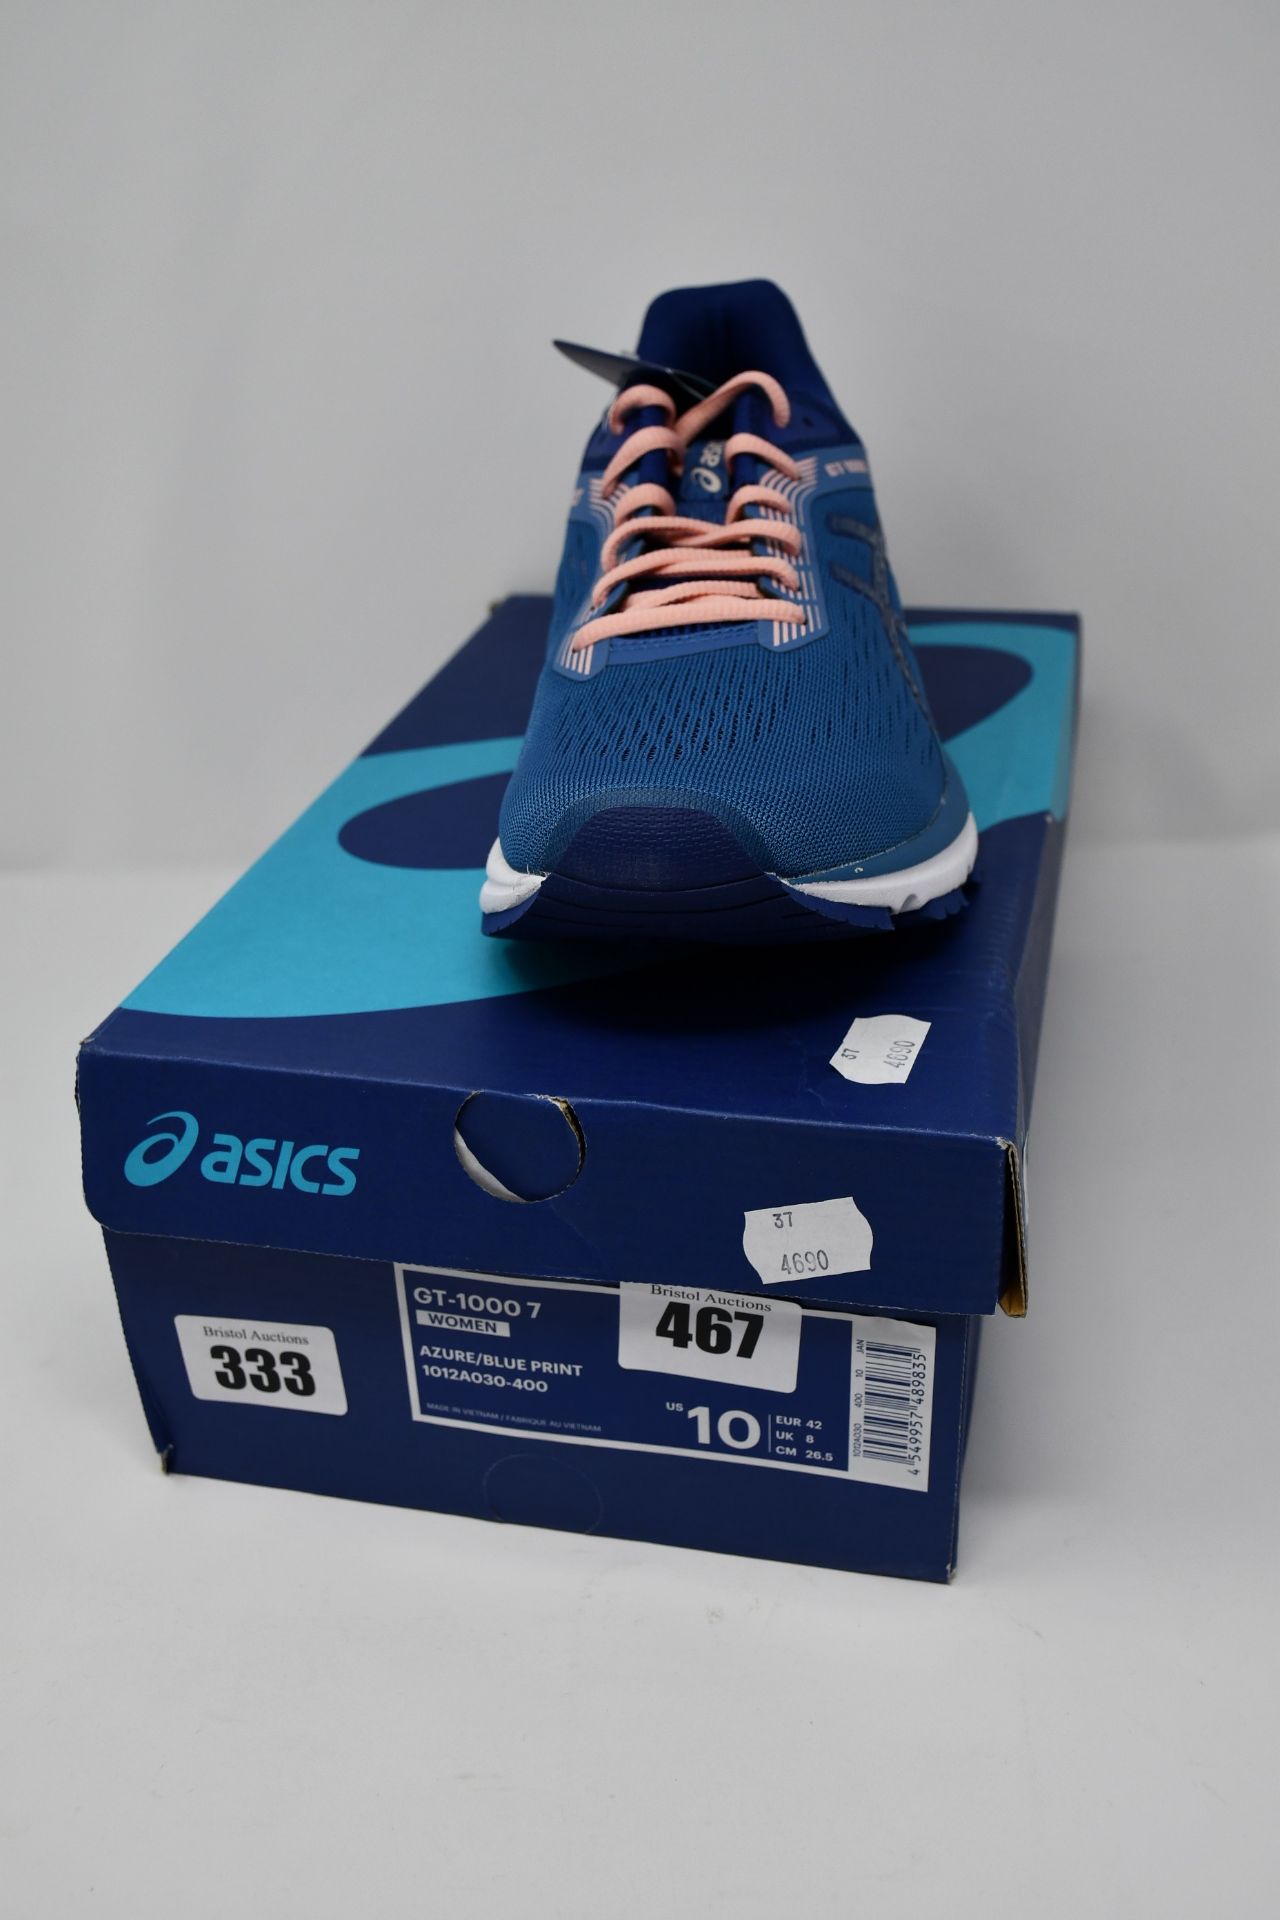 A pair of as women's as new Asics GT-1000 7 trainers (UK 8).